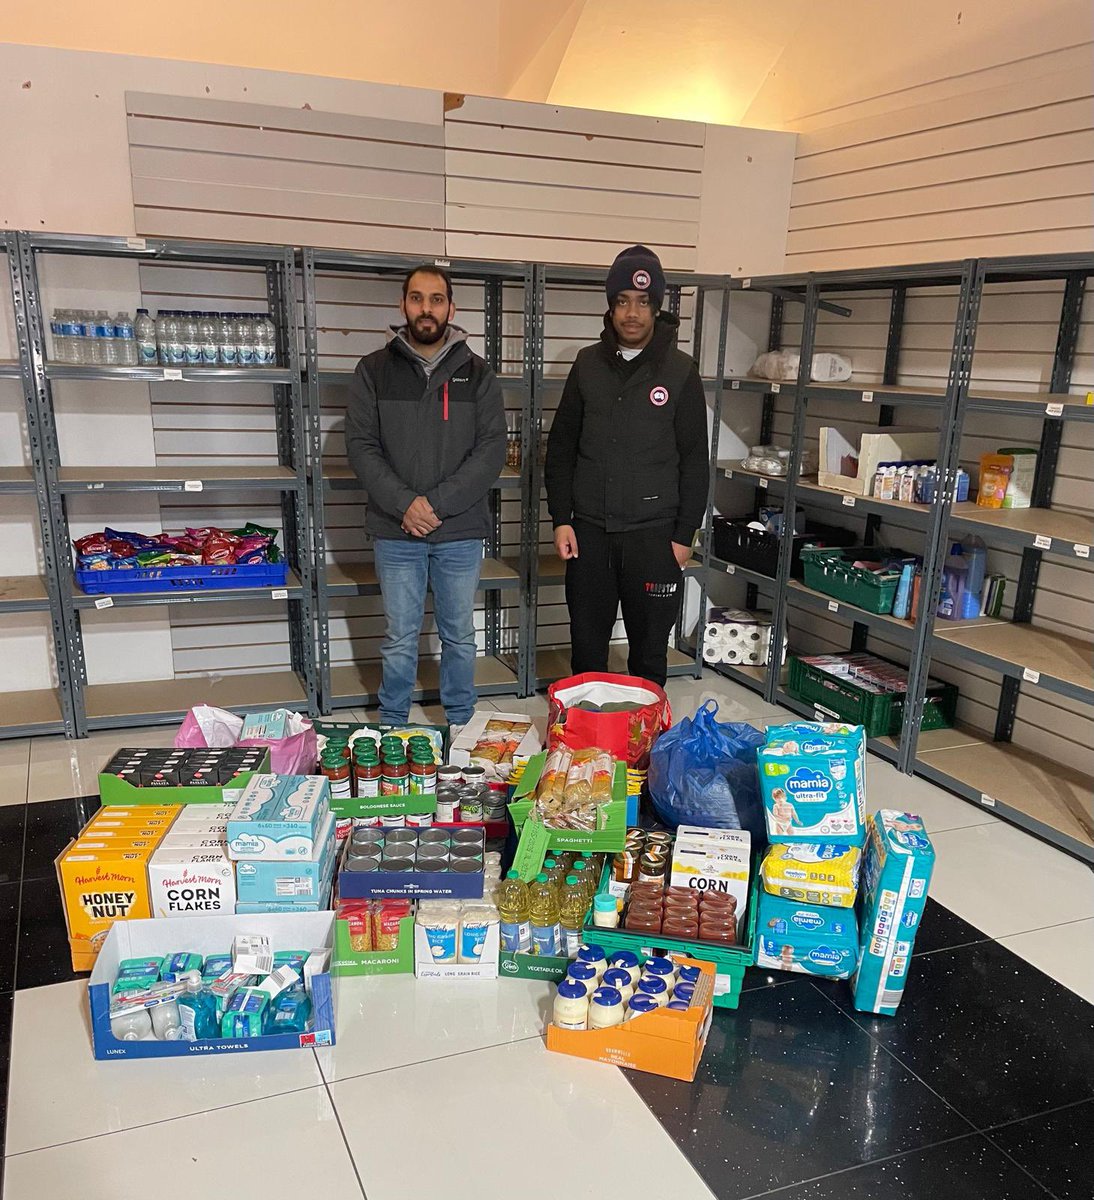 Ahmadiyya #Muslim Community of #Wolverhampton @amawolves helping the needy in these difficult times when the cost of living is too high ⬆️, by donating to @walsallfoodbank @UKMuslimYouth @AMYA_Humanity @AMYA_WM Serving humanity is what our faith teaches us.